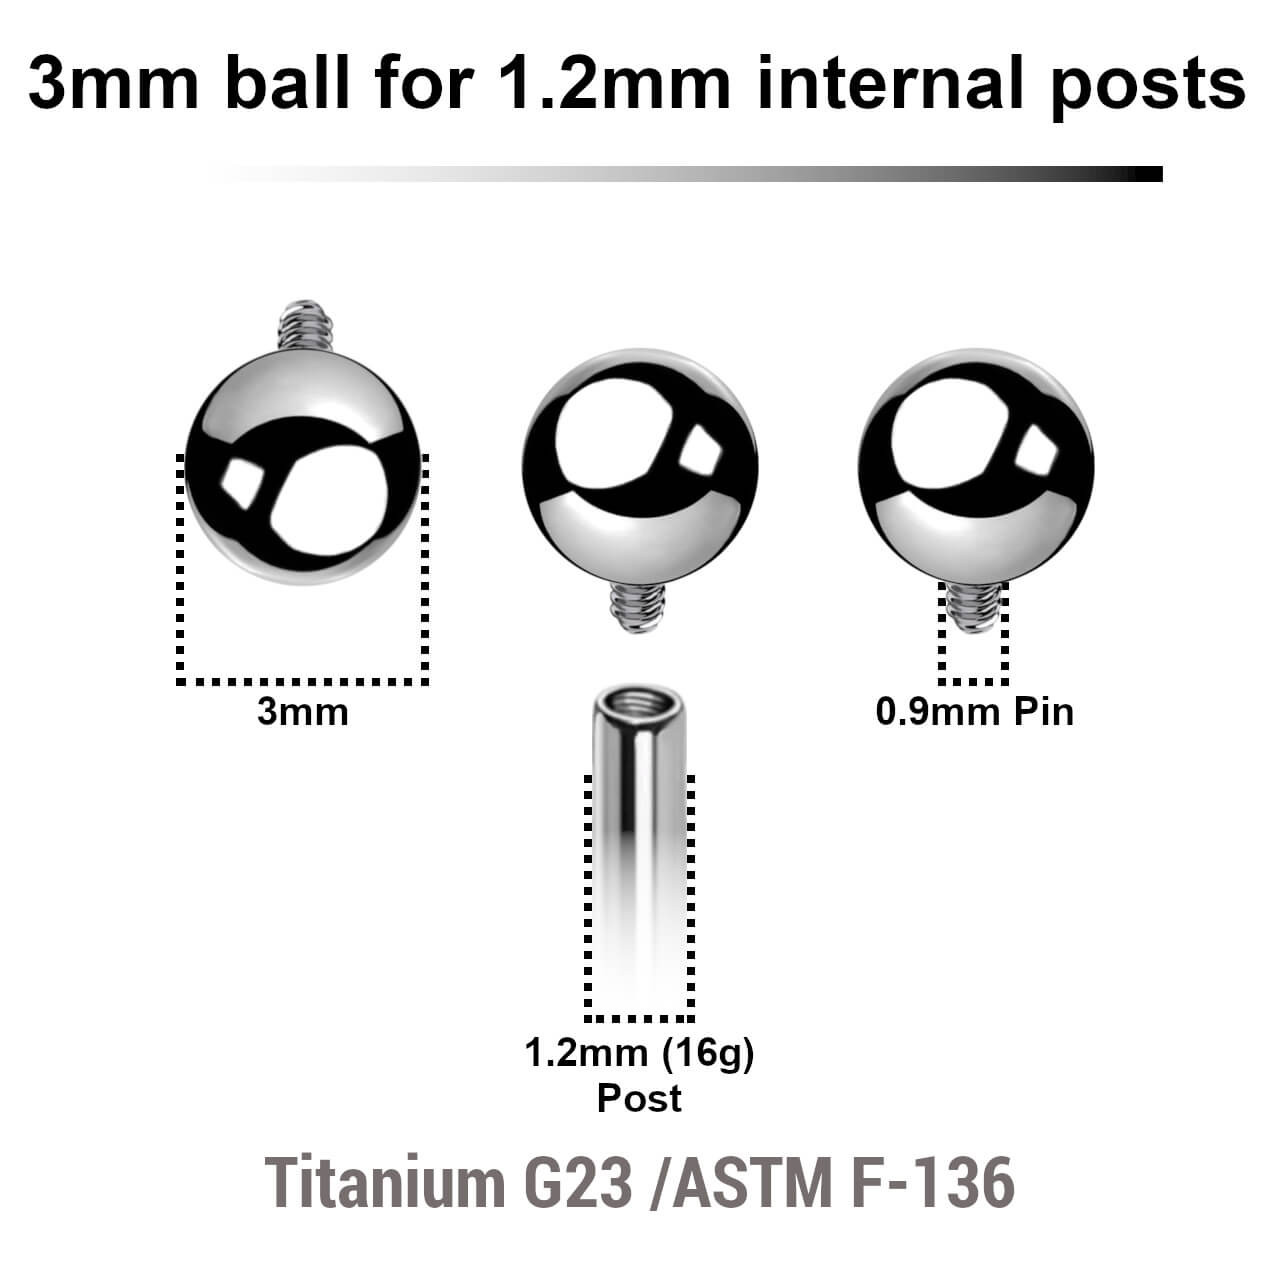 YYB12N3 Pack of 25 high polished titanium balls with 3mm diameter for 1.2mm internally threaded post